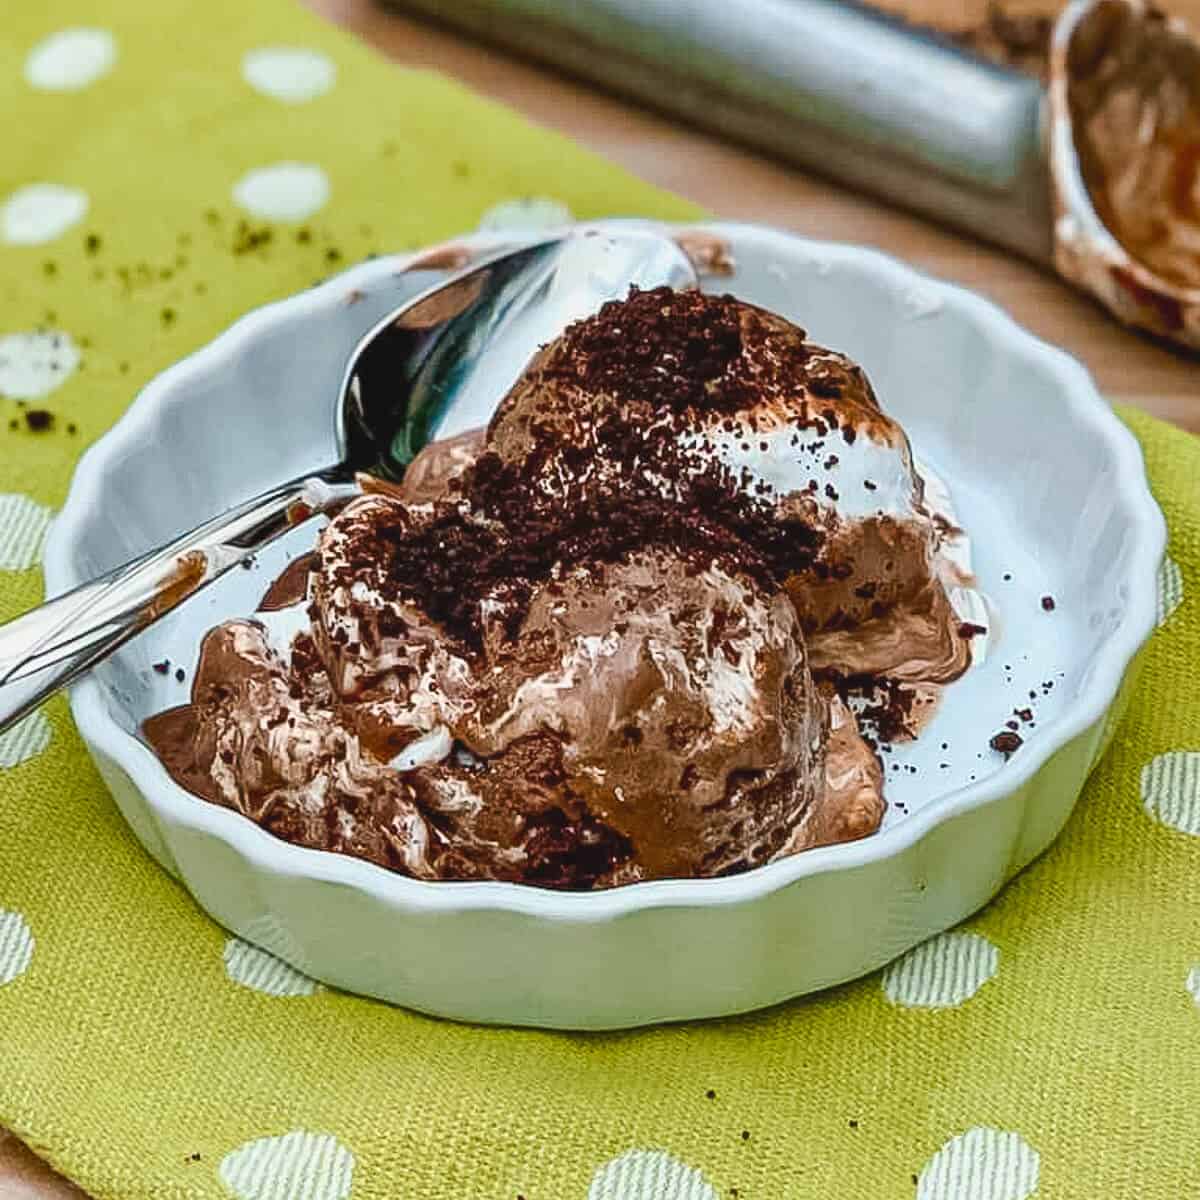 Chocolate Mint Marshmallow Ice Cream in bowl with spoon on a green towel.